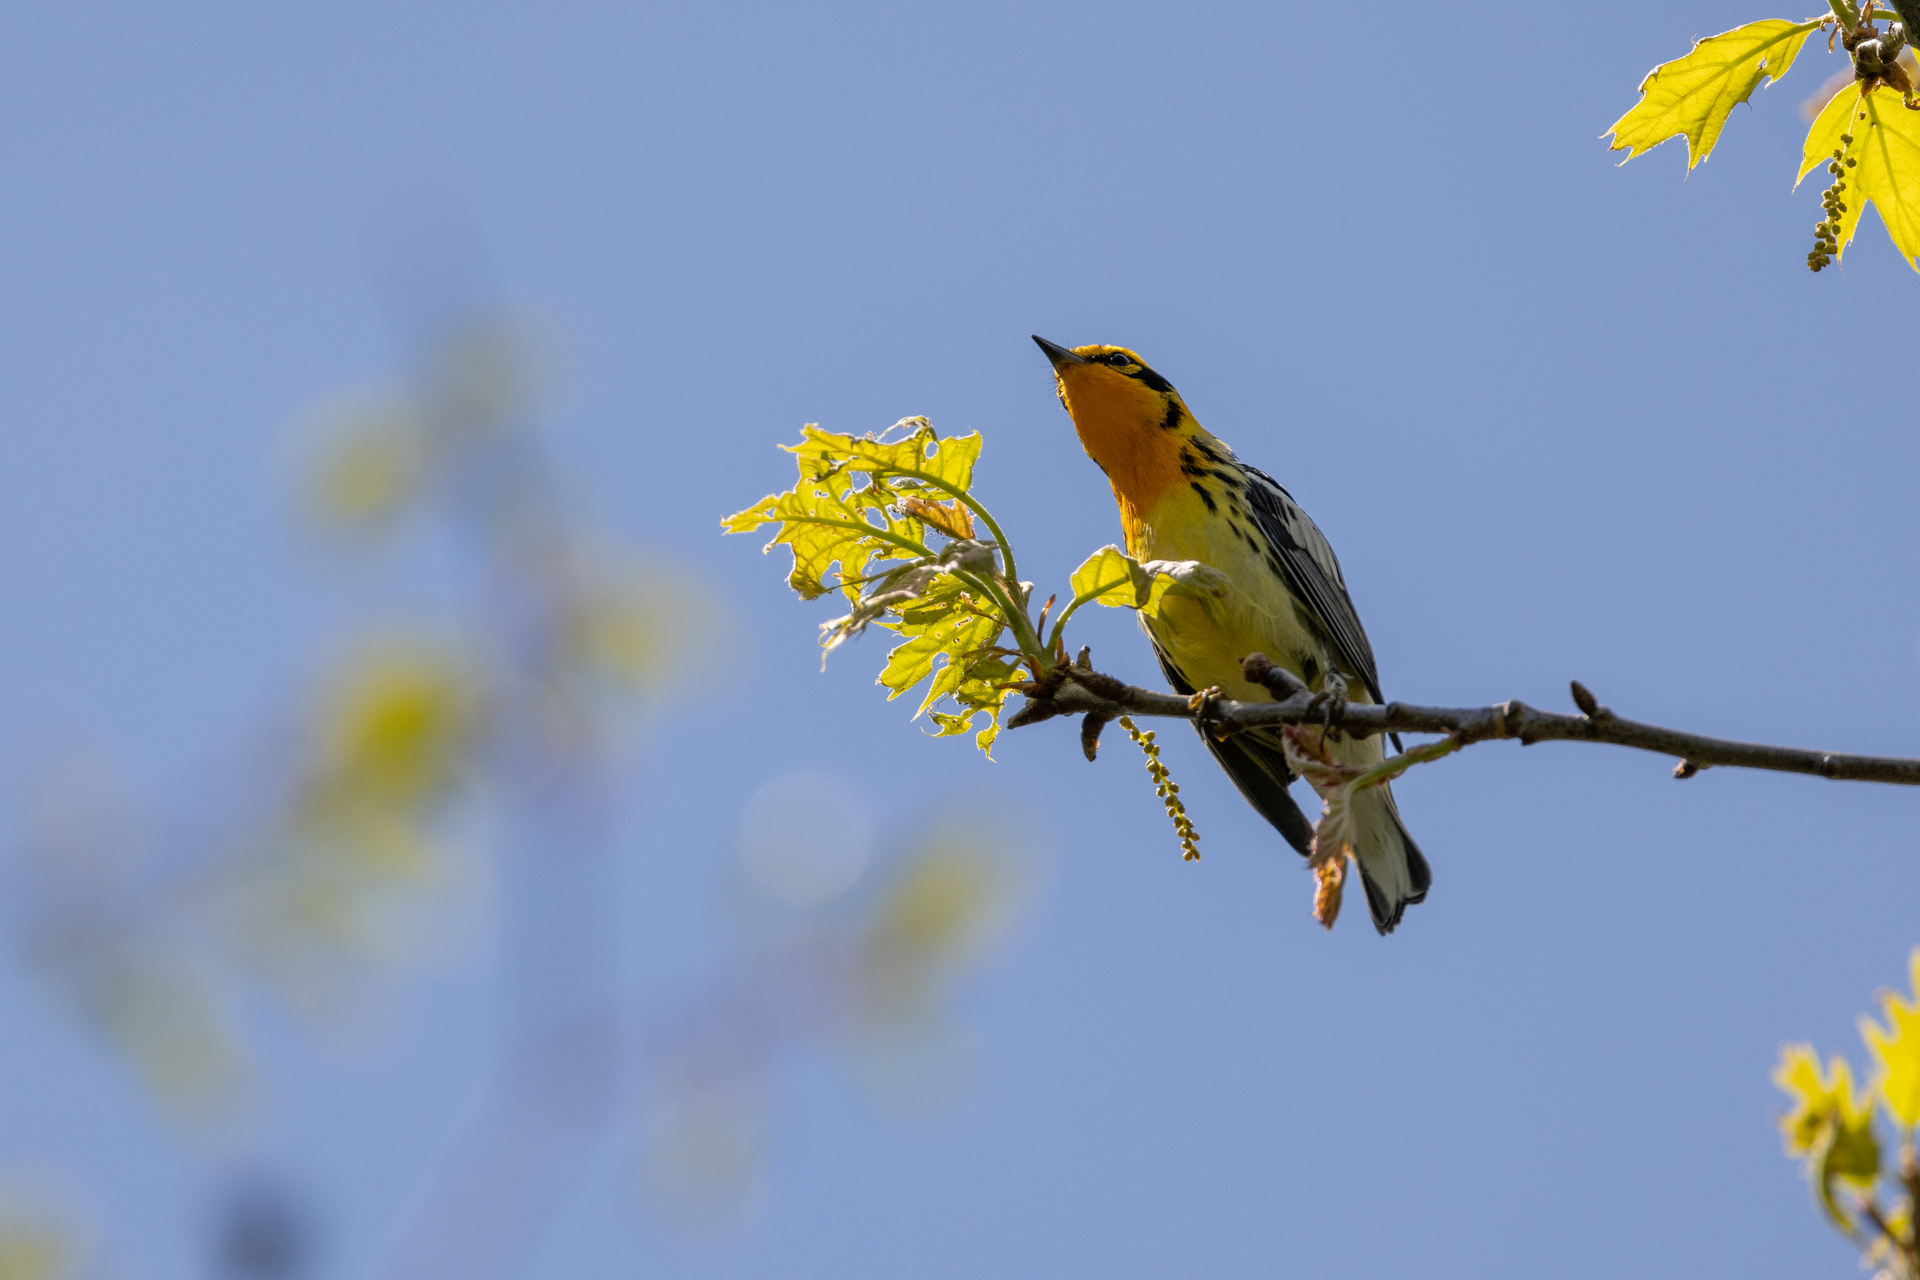 Blackburnian Warbler with a yellow head, white belly, and black bands on the side, looking out into the distance from its position on a stick.